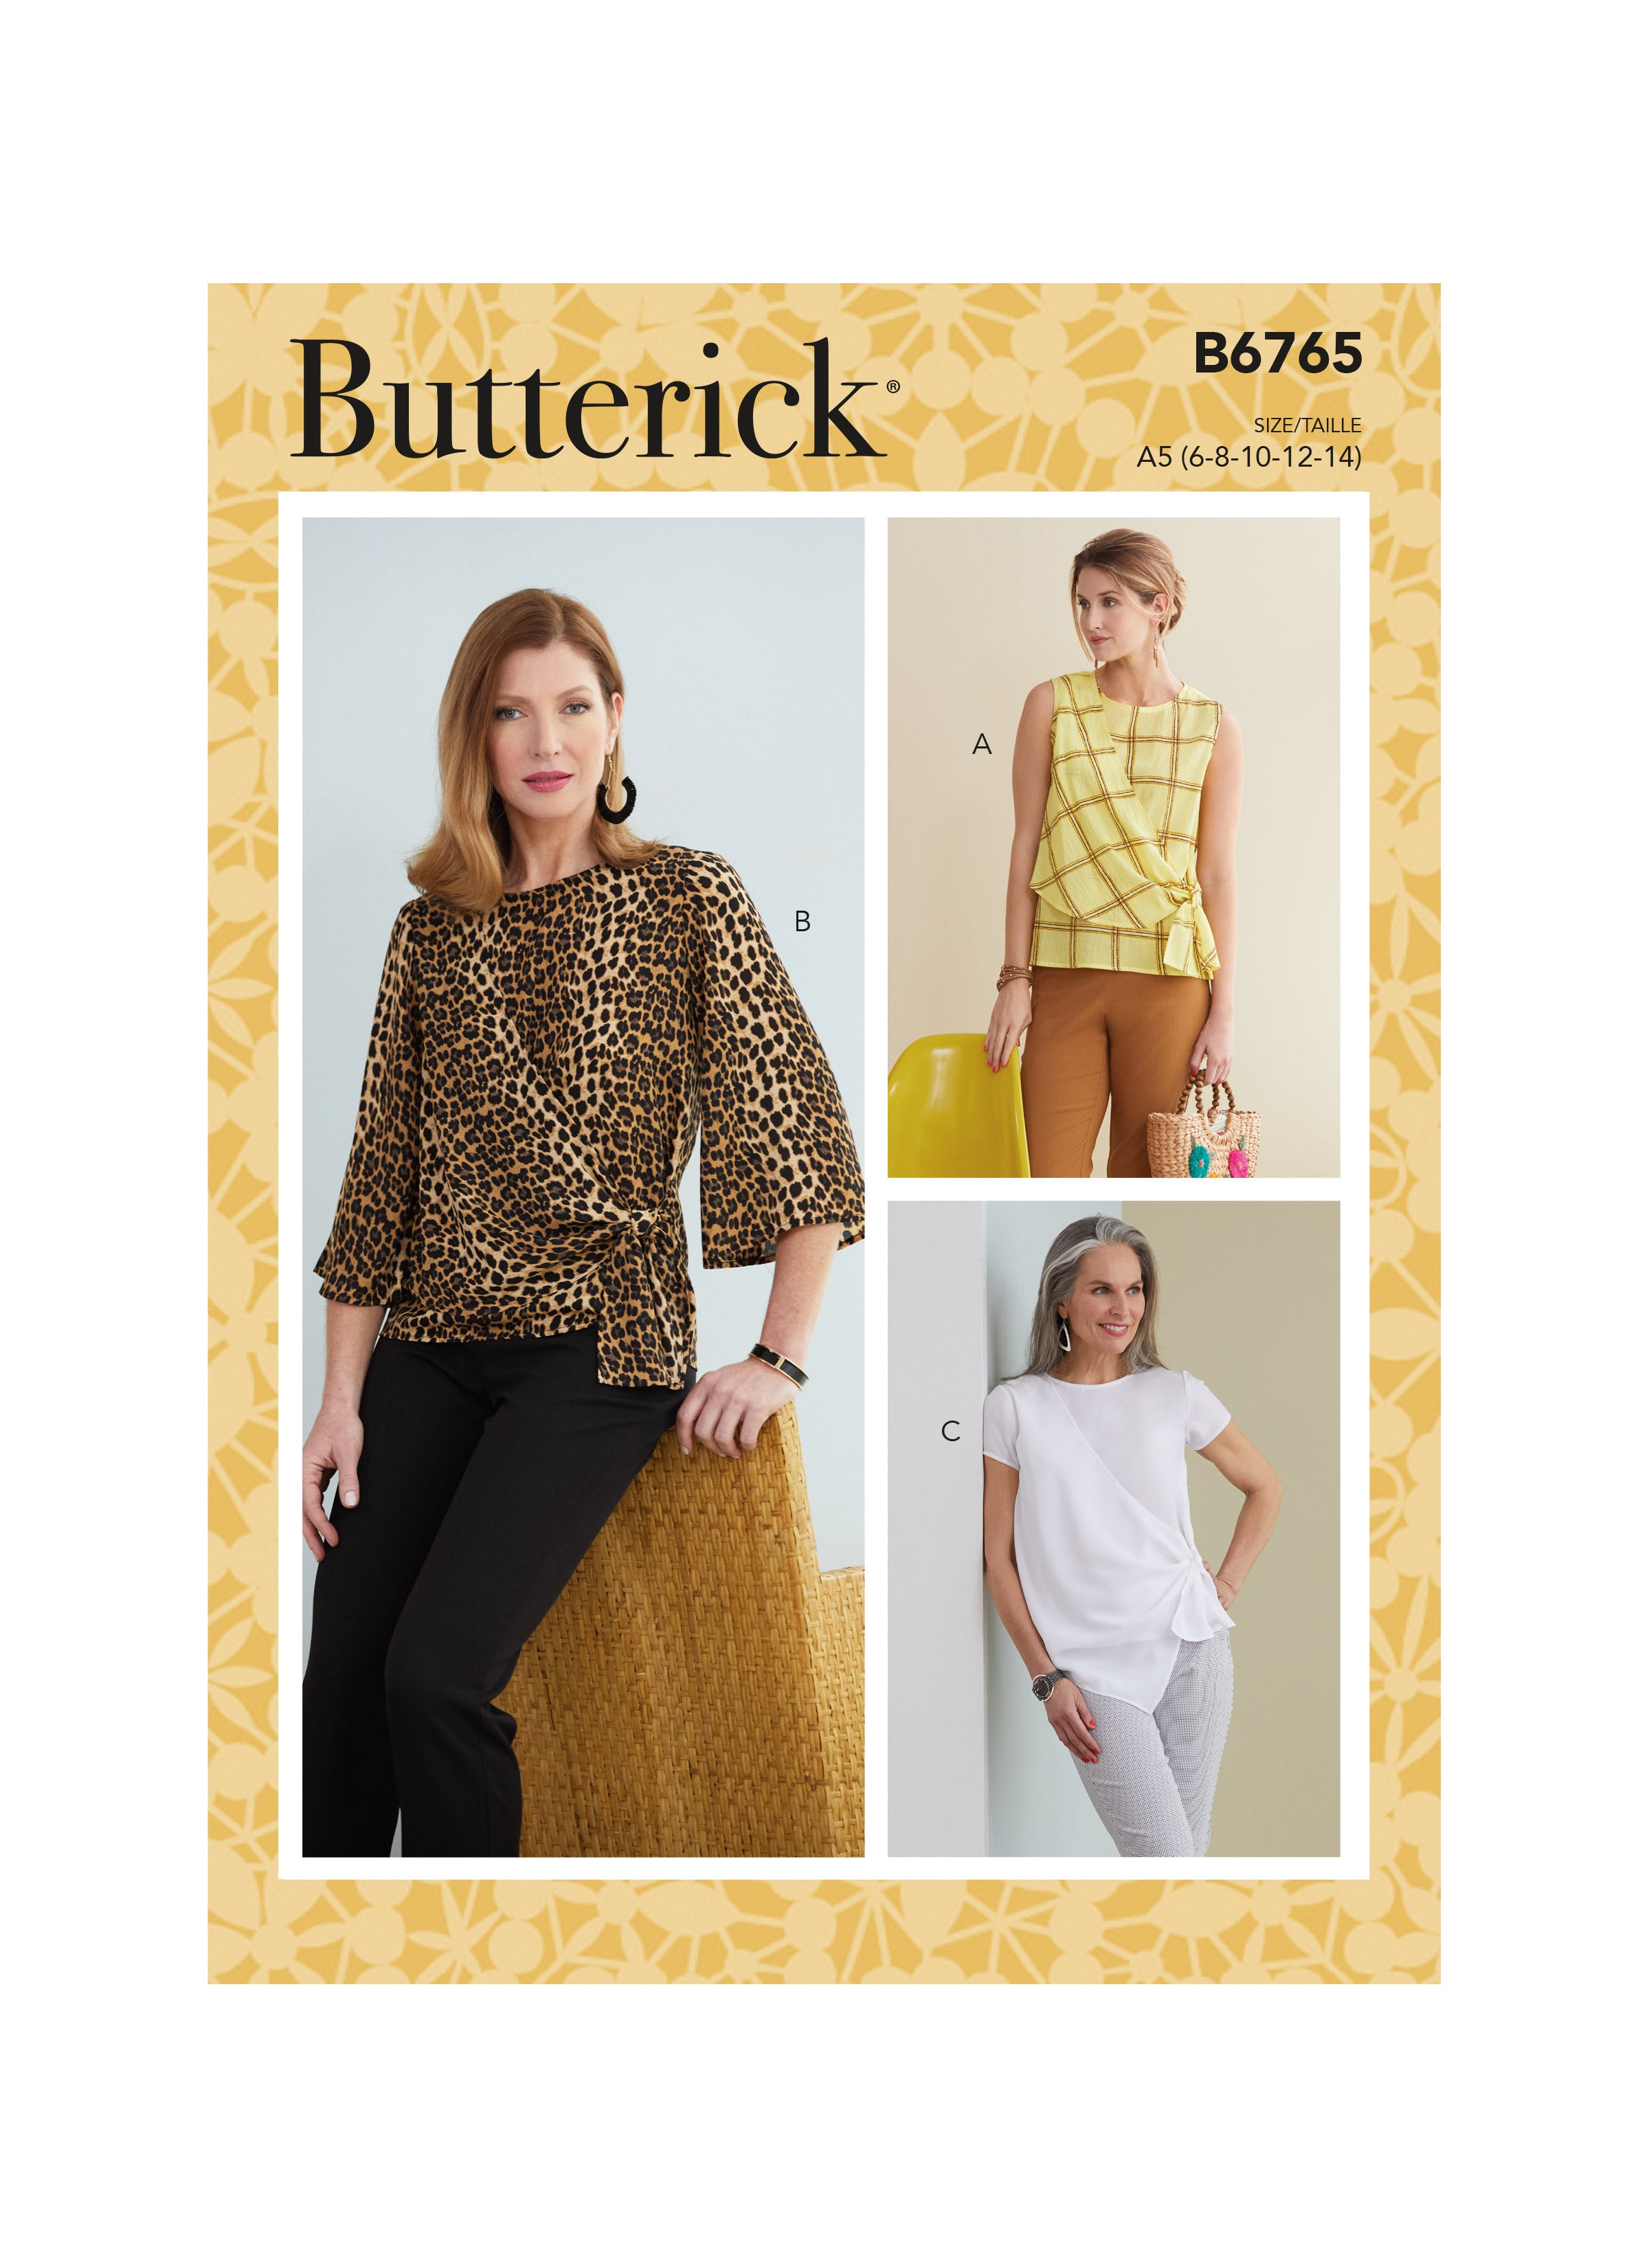 Butterick sewing pattern 6765 Misses' Tops from Jaycotts Sewing Supplies